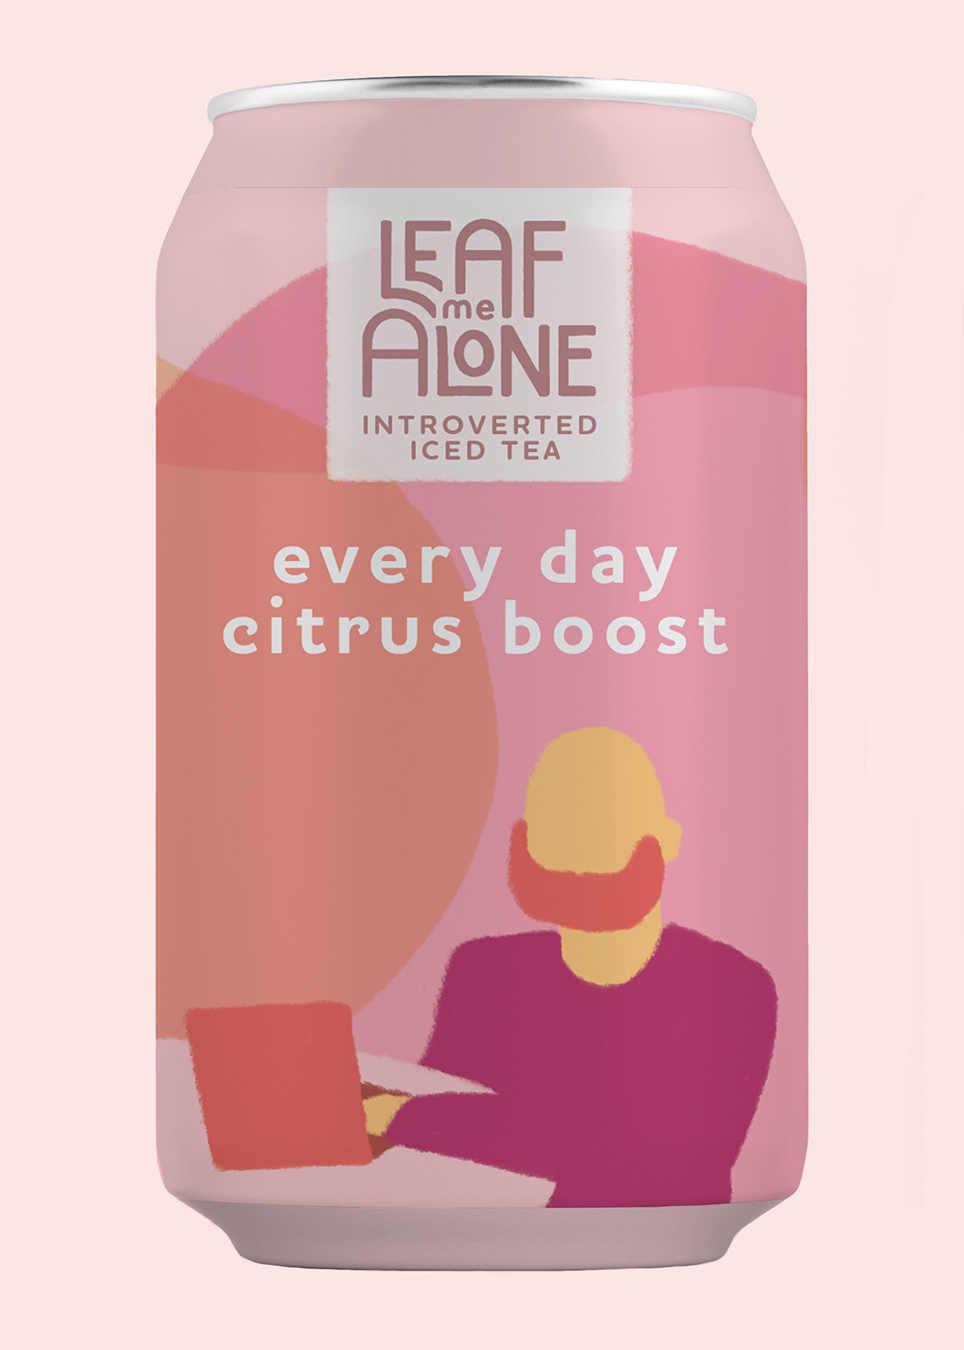 Mockup of an ice tea can from brand 'Leaf Me Alone'. The flavor is every day citrus boost and the can is illustrated with a figure working on a laptop.